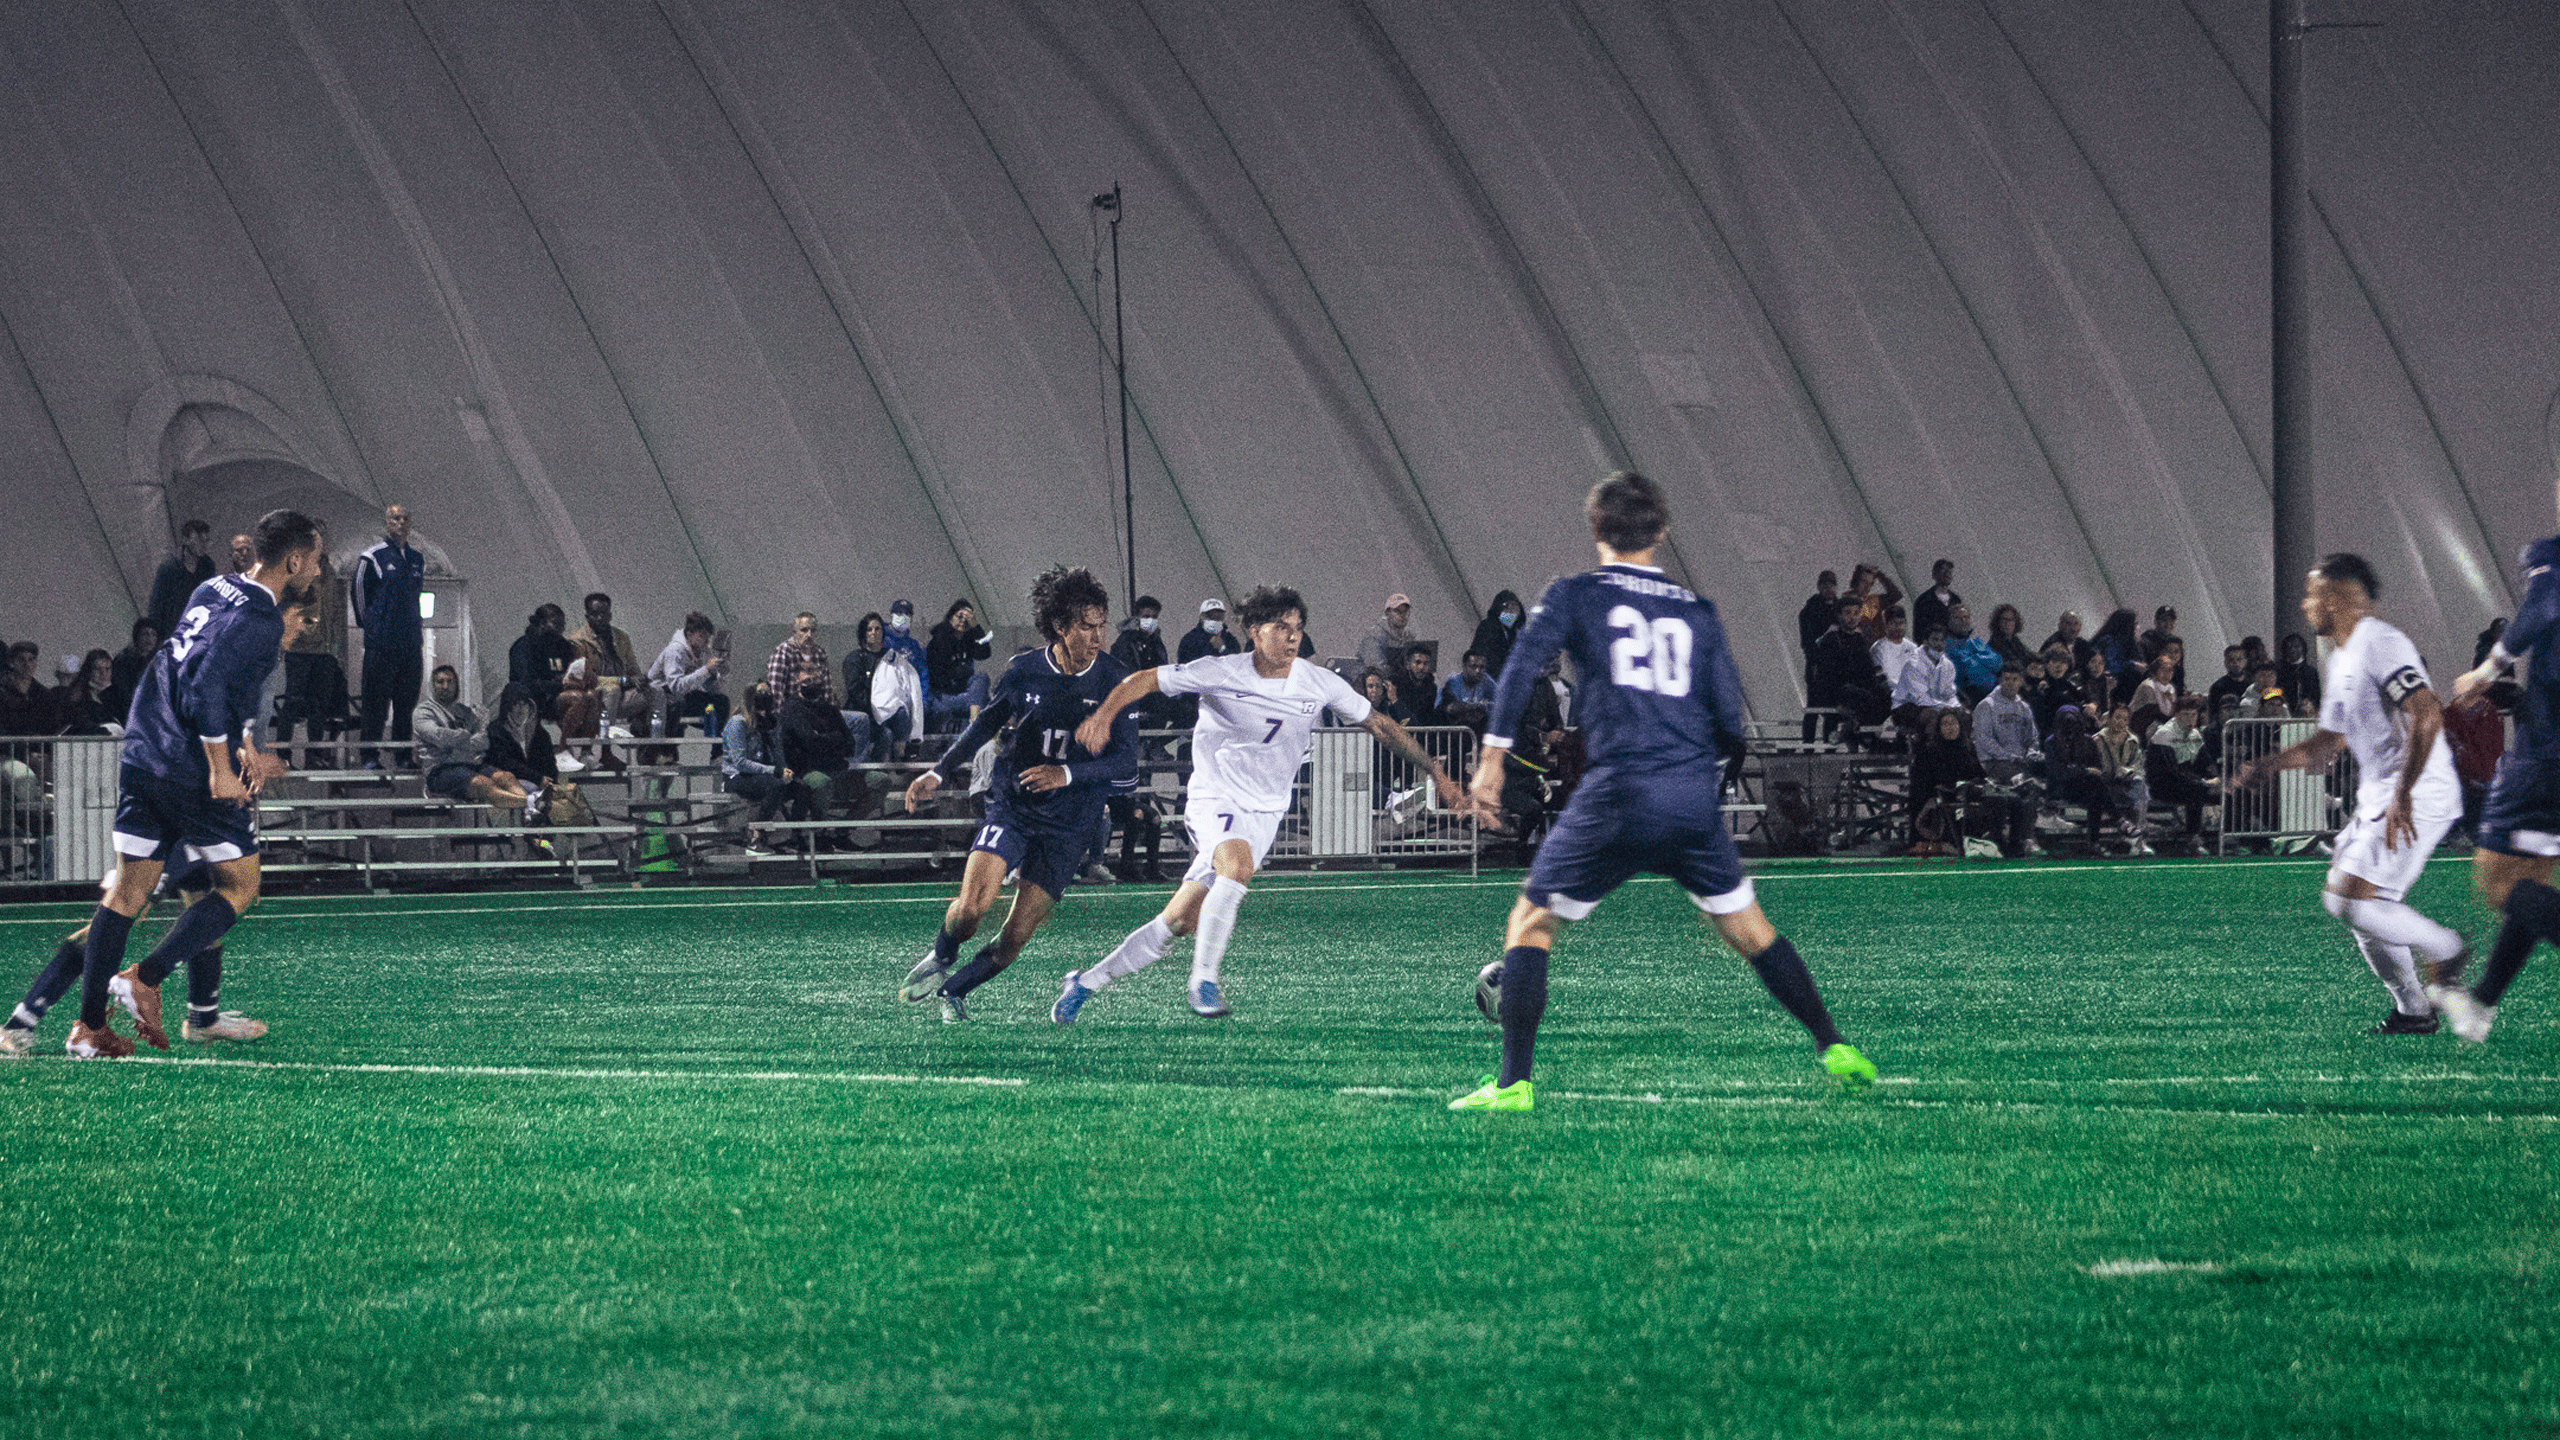 A rams men's soccer player in a white jersey is swarmed by a group of U of T defenders wearing navy blue uniforms